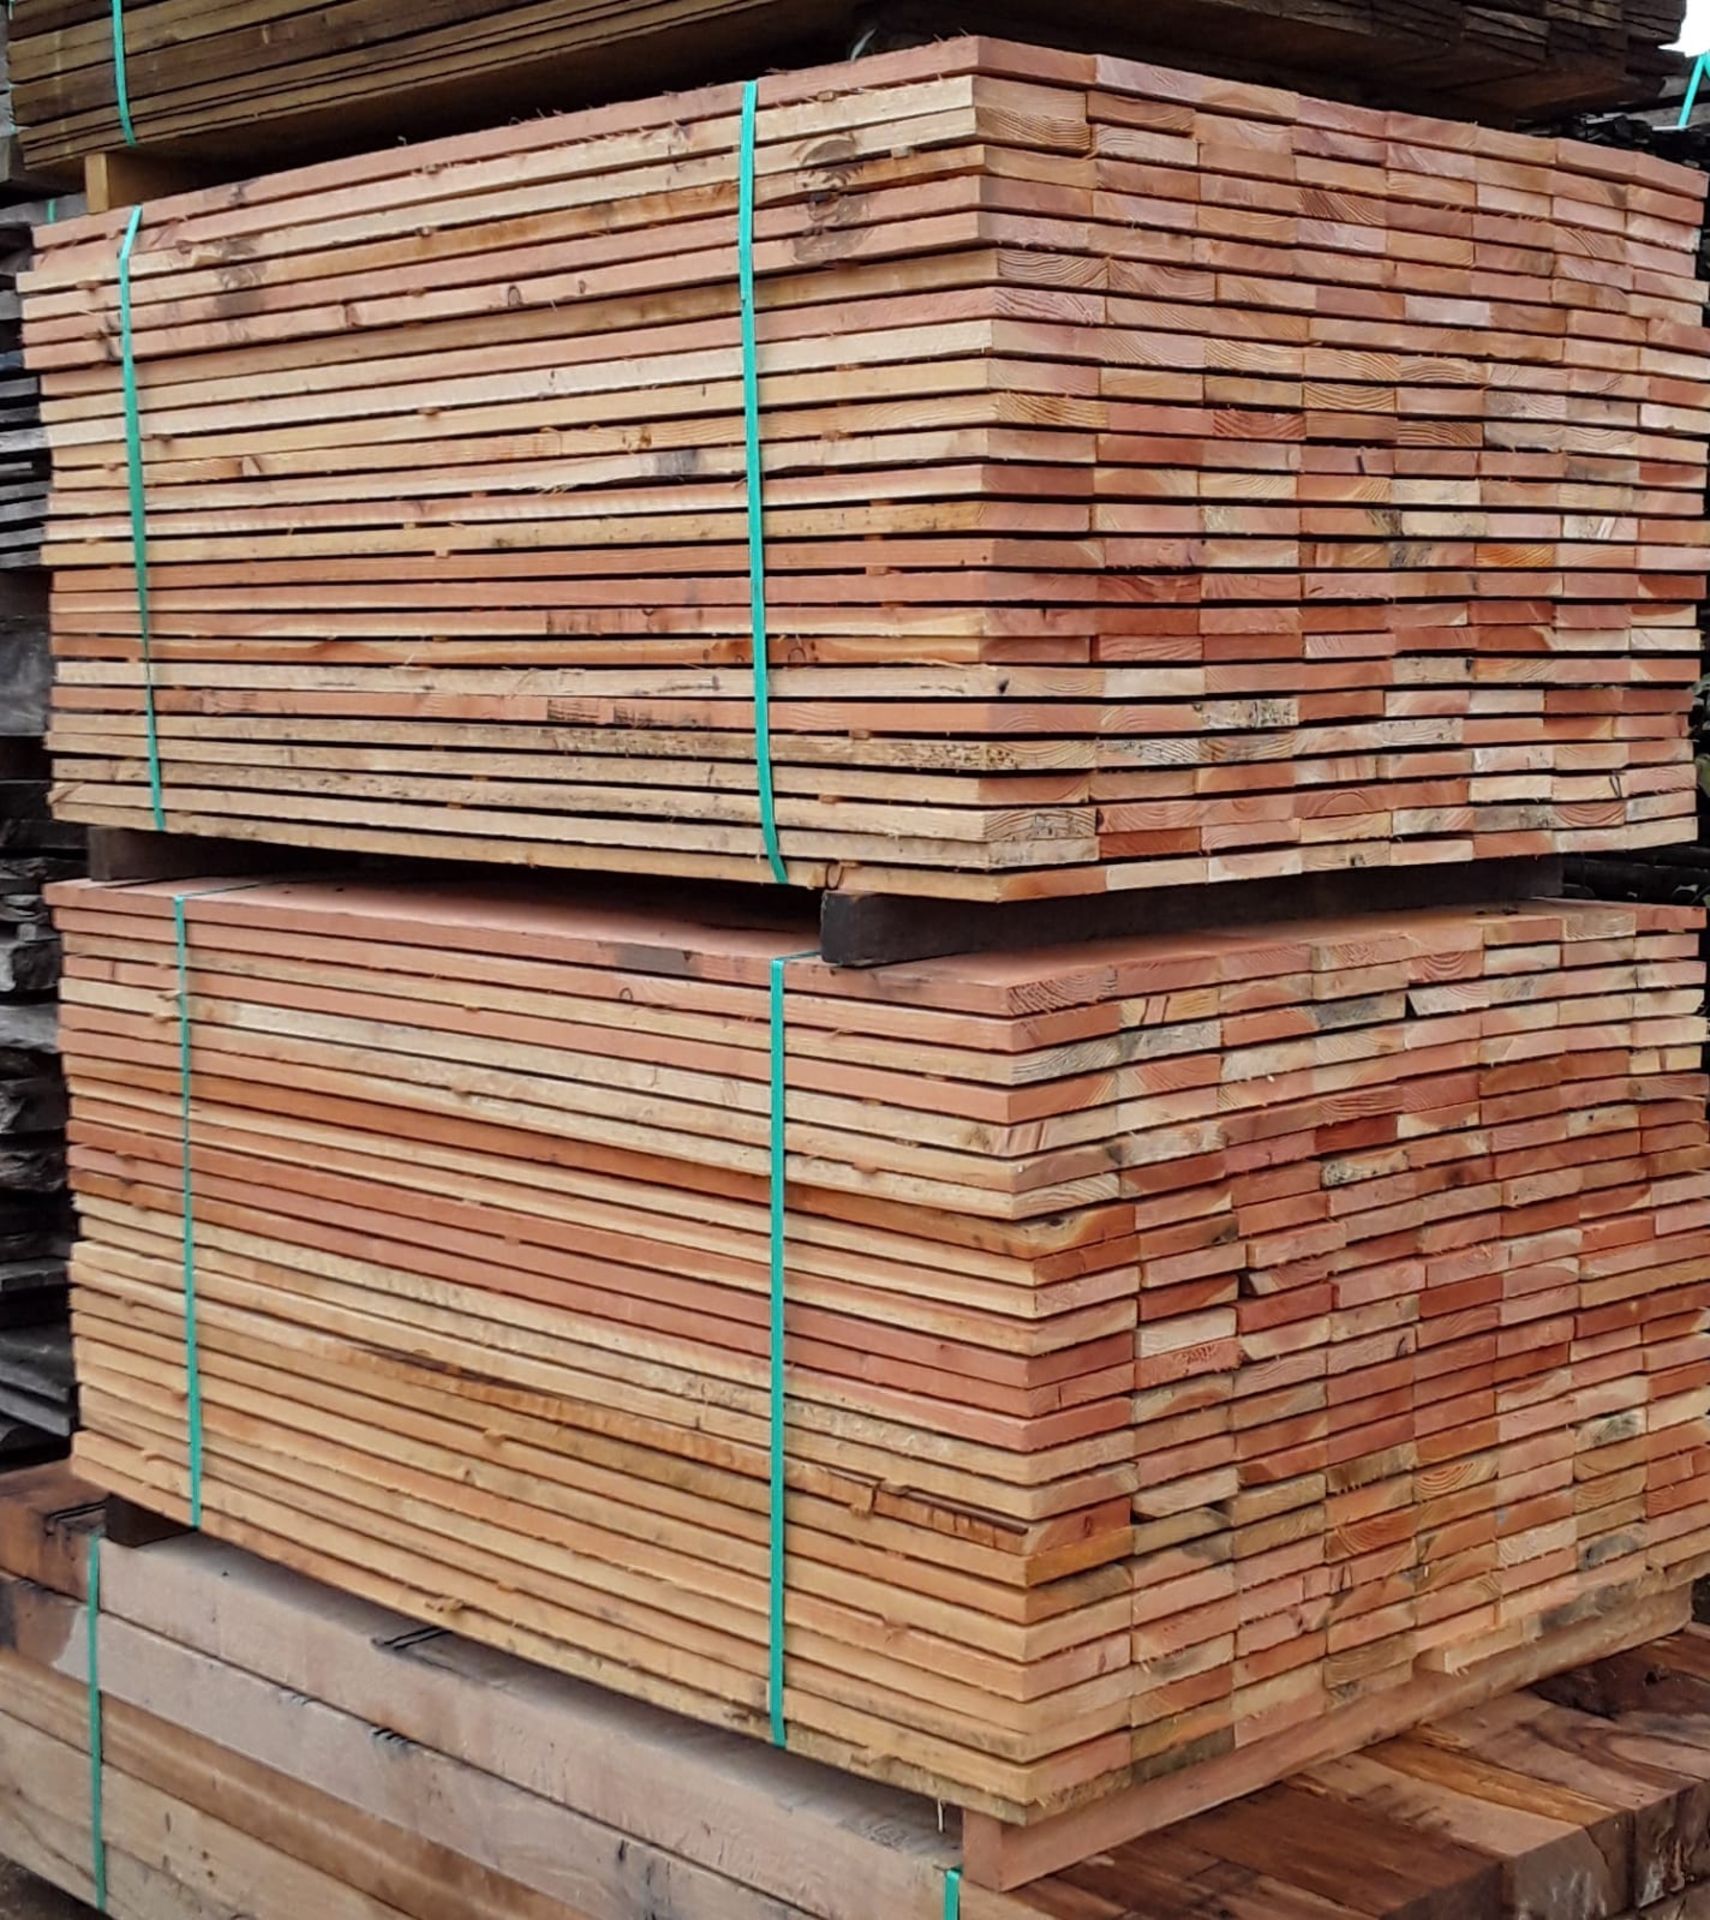 100x Softwood Unseasoned Sawn Mixed Larch / Douglas Fir Boards / Planks / Cladding - Image 2 of 12